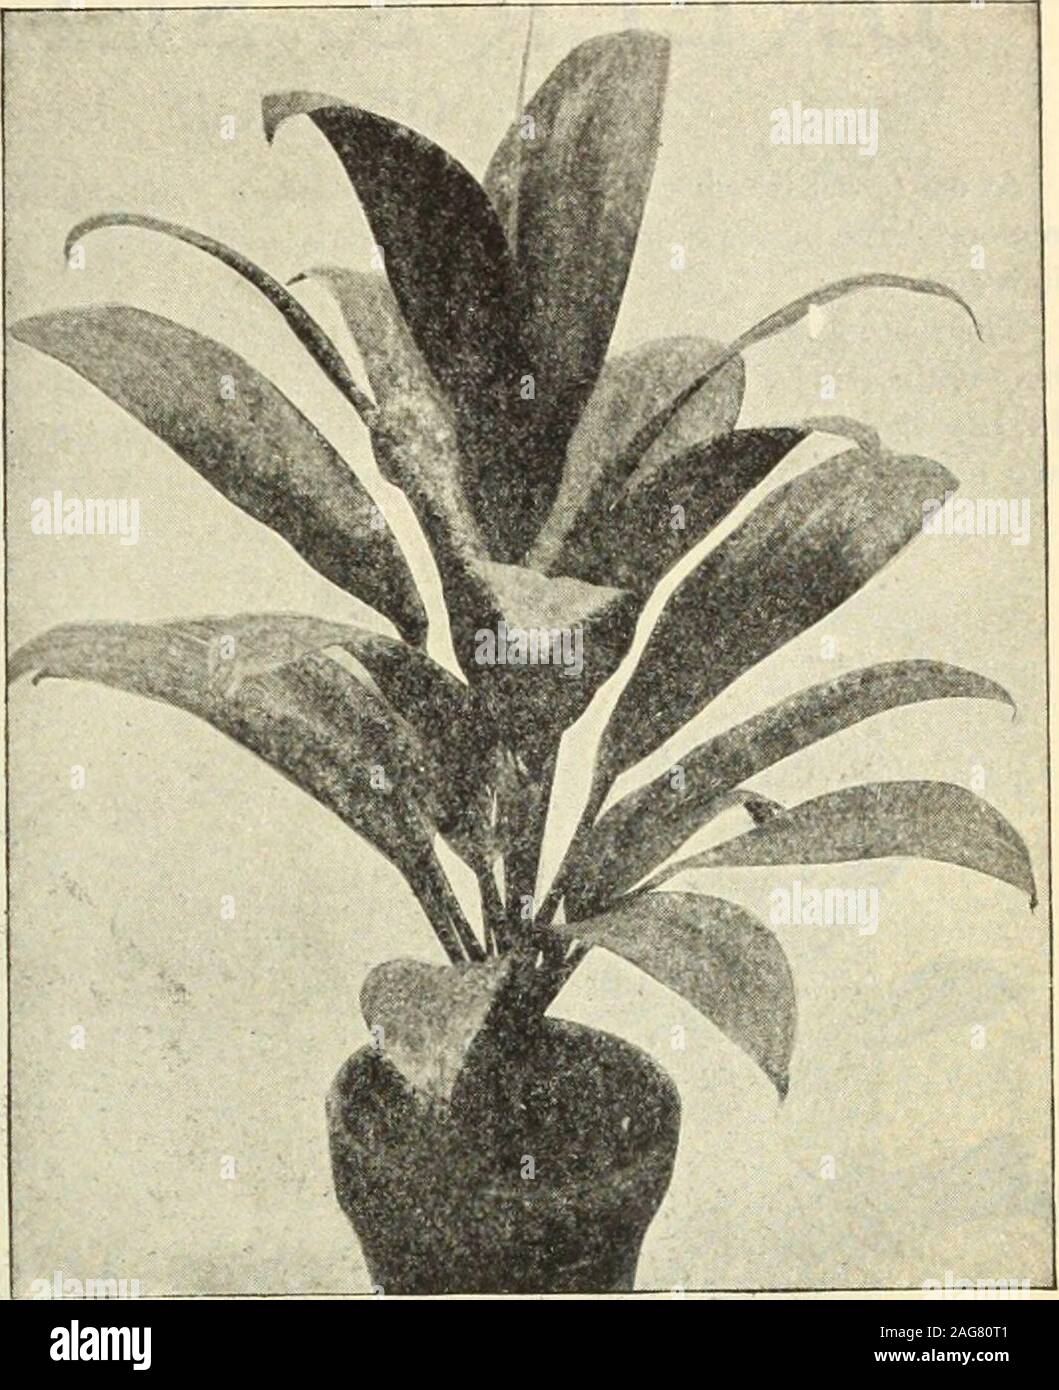 . Dreer's 1913 garden book. Bright green, irregularly spotted with white, midrib and stems creamy-white.Bausei. Leaves yellowish-green, blotched dark green and spotted white.Bowmanni. Rich deep green leaves, blotched with irregular markings of light pea-green.Eburnea. Light green, profusely dotted and spotted with white, footstalks stained pale cinnamon; a very pretty species.Imperialis. Dark green with yellow spots.Jenmanii. Long, narrow, bright green foliage, spotted with white.Leopoldi. Satiny green, broad ivory-white midrib.JHagnifica. Shining sombre green foliage, variegated with blotches Stock Photo